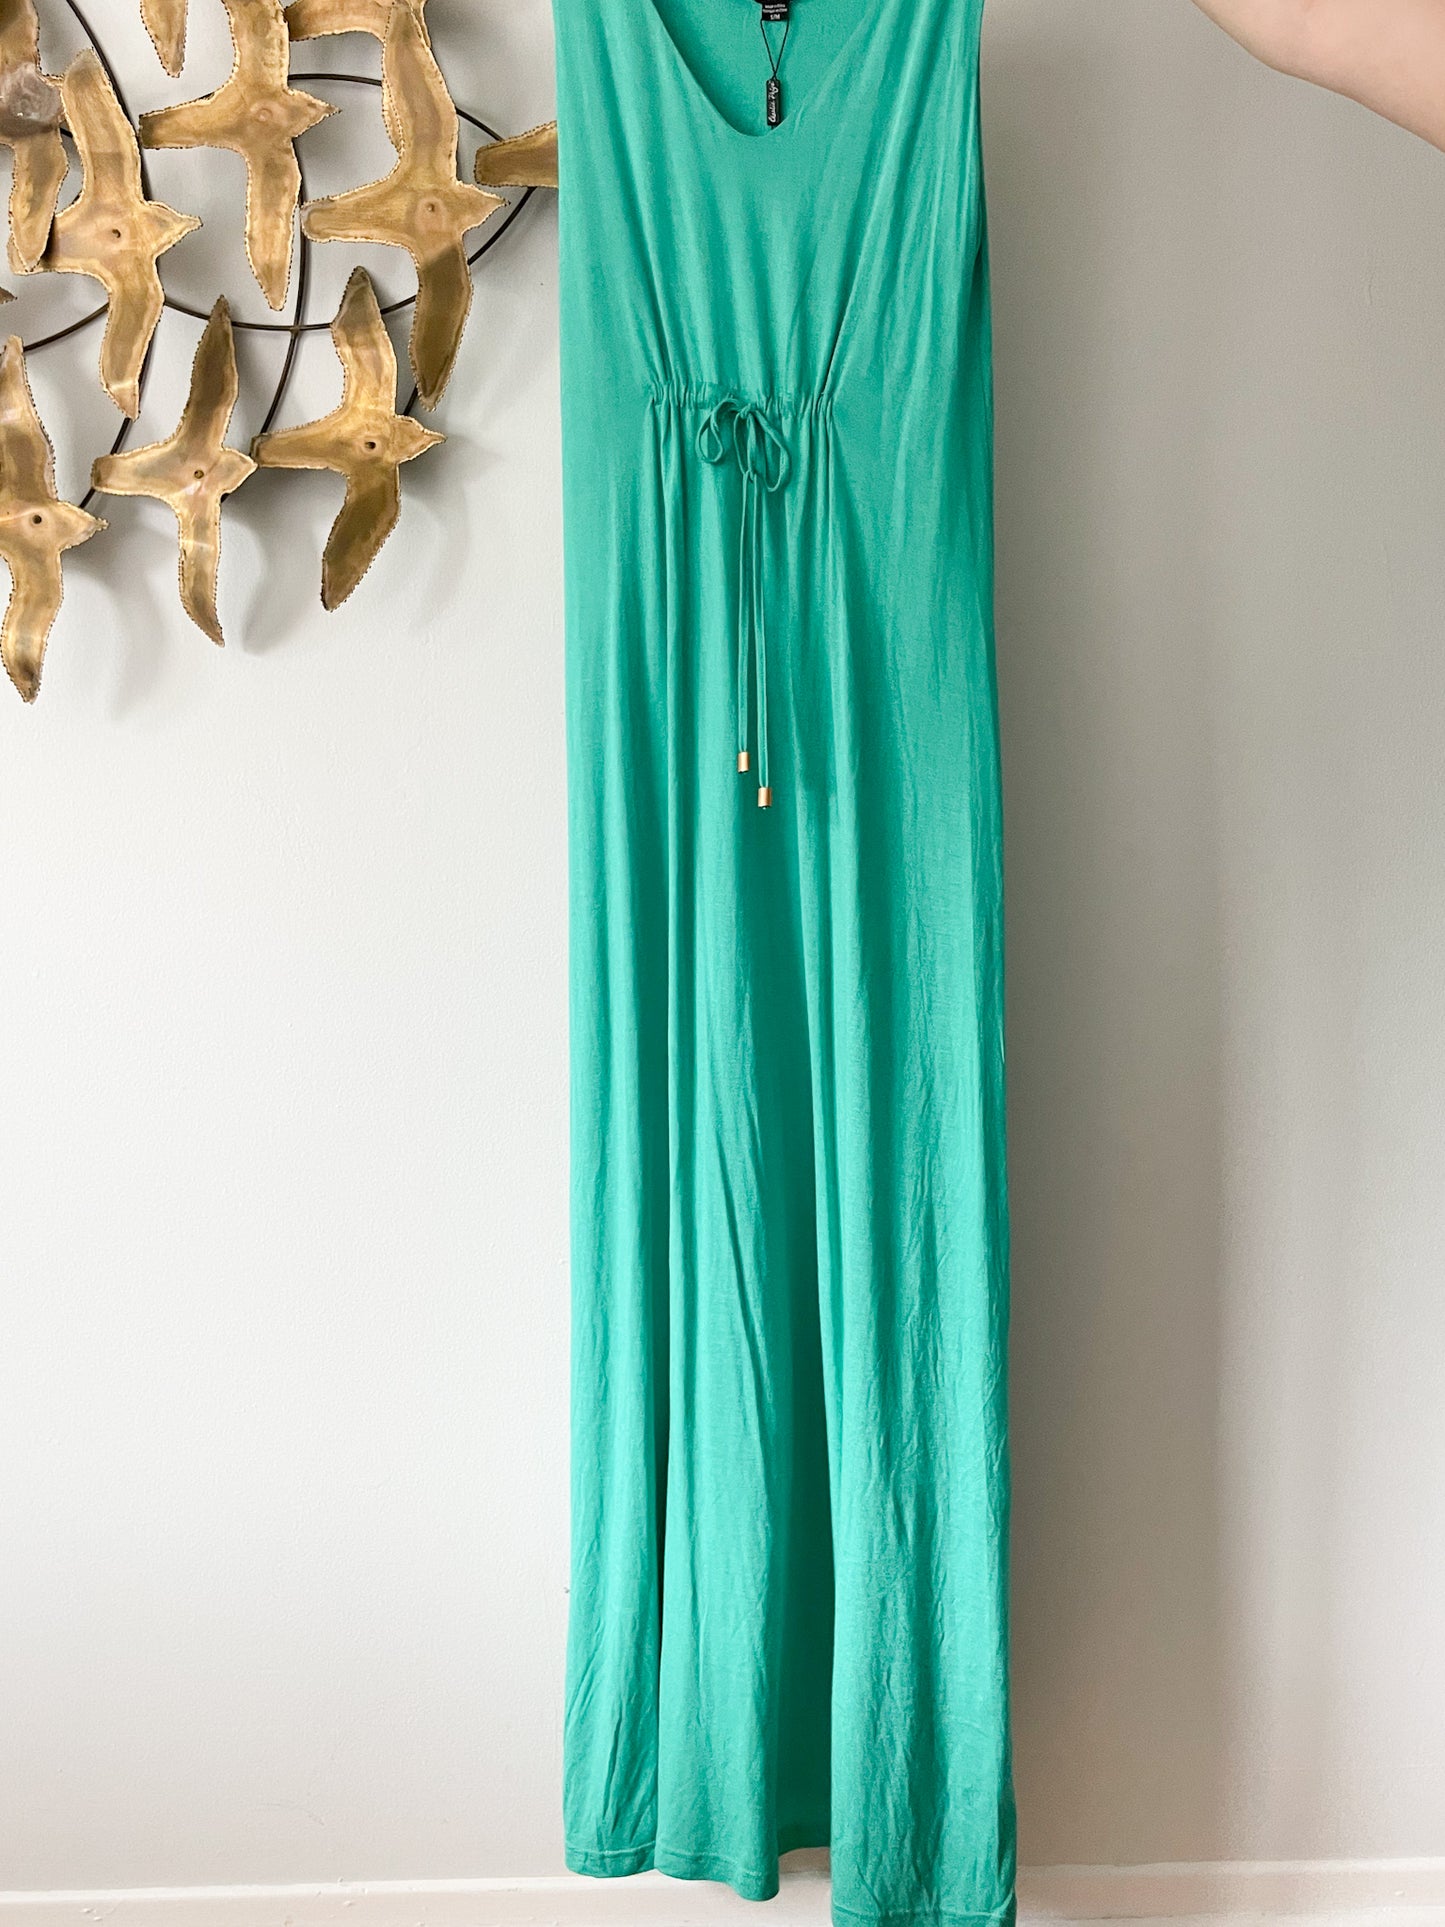 Charlie Paige Green Jersey Maxi Dress NWT - S/M